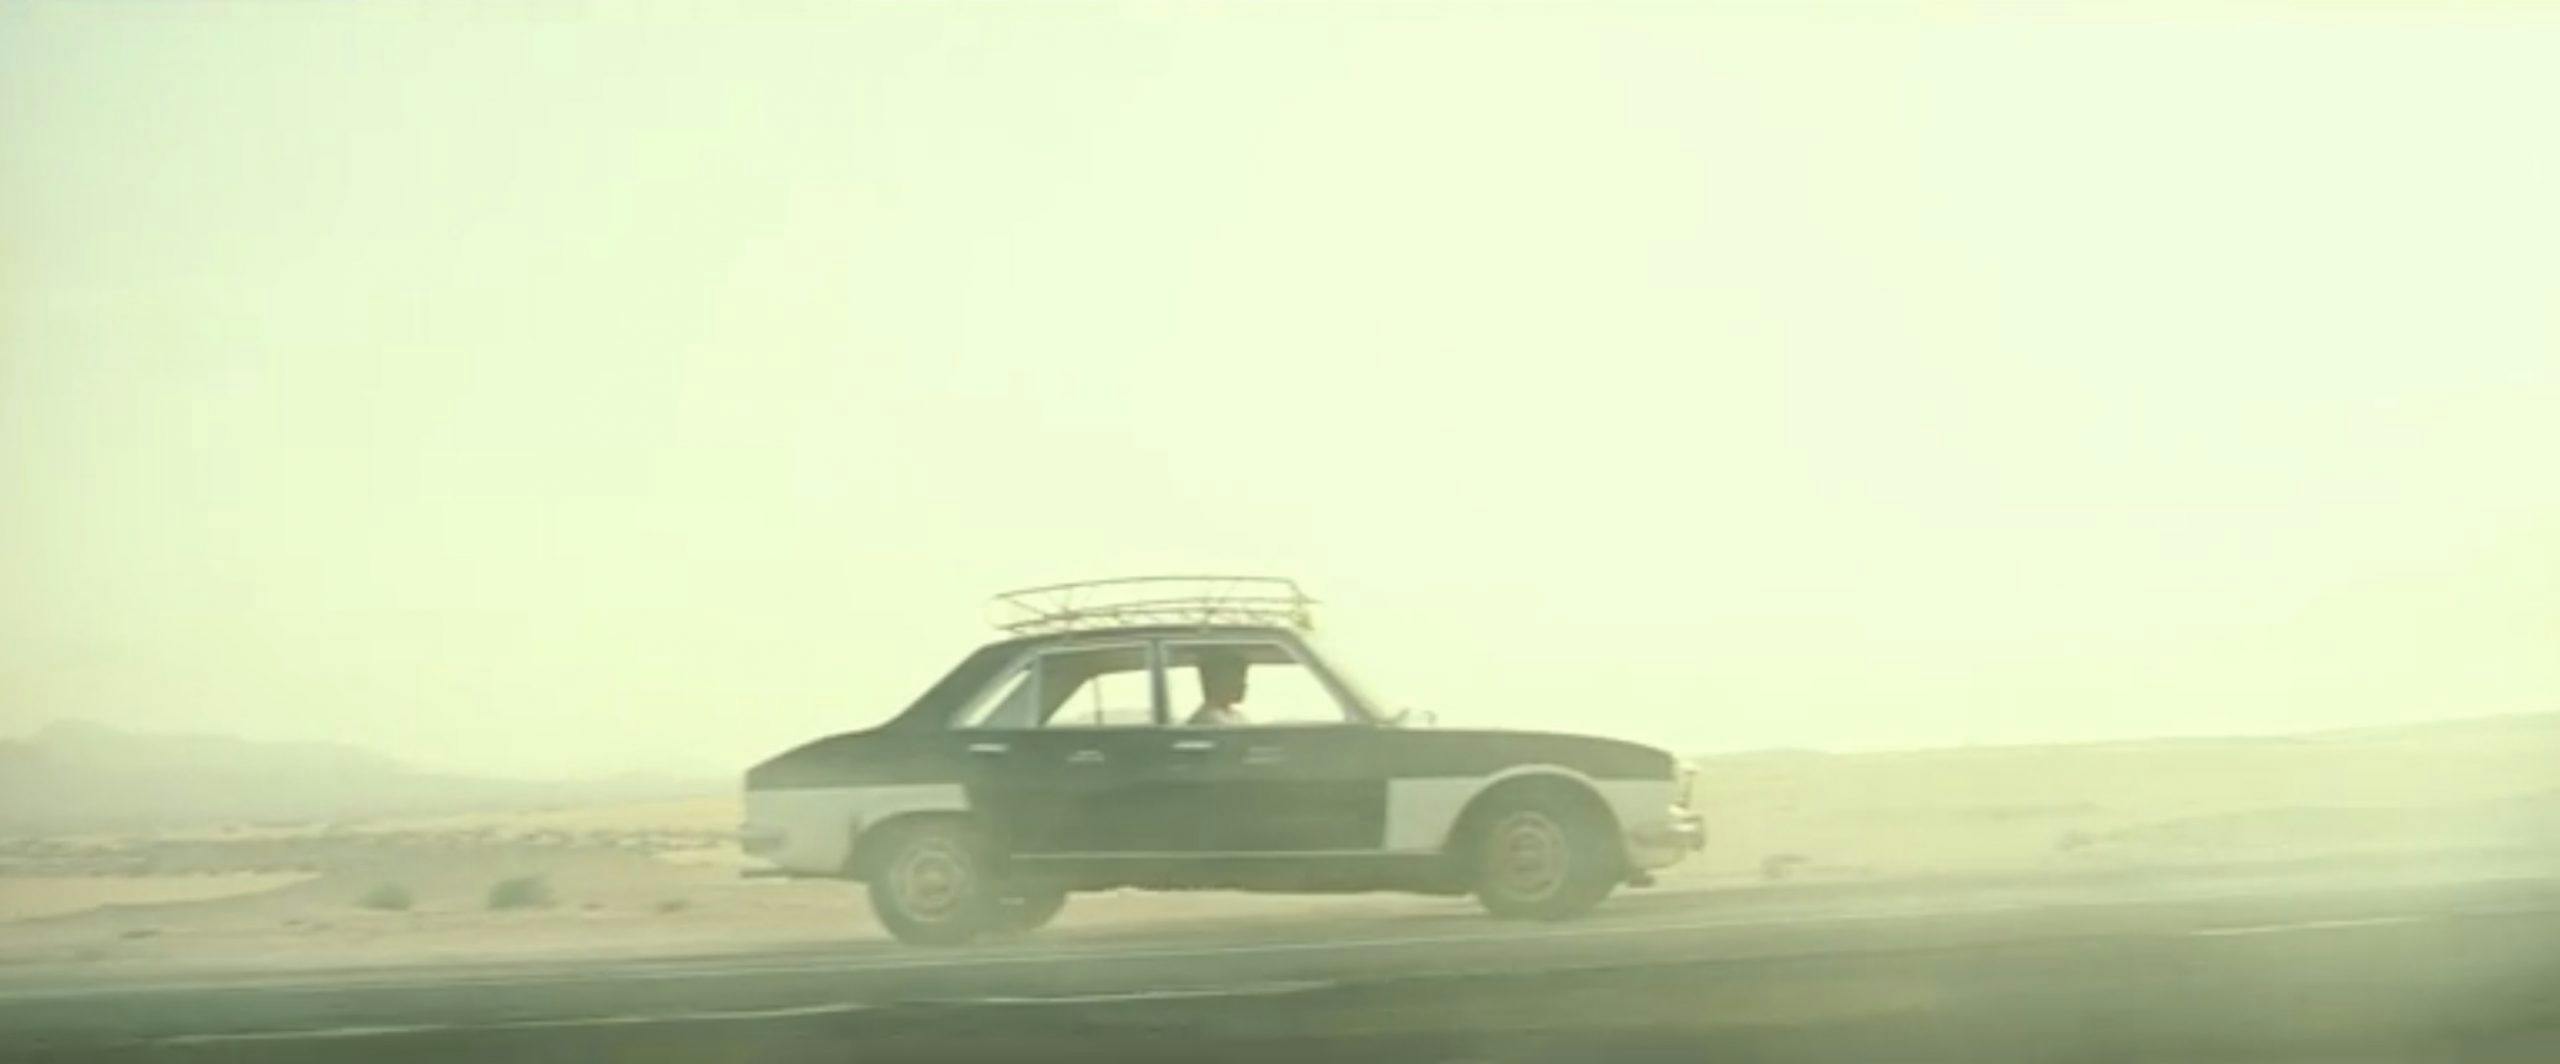 chris pine taxi chase scene dust cloud action